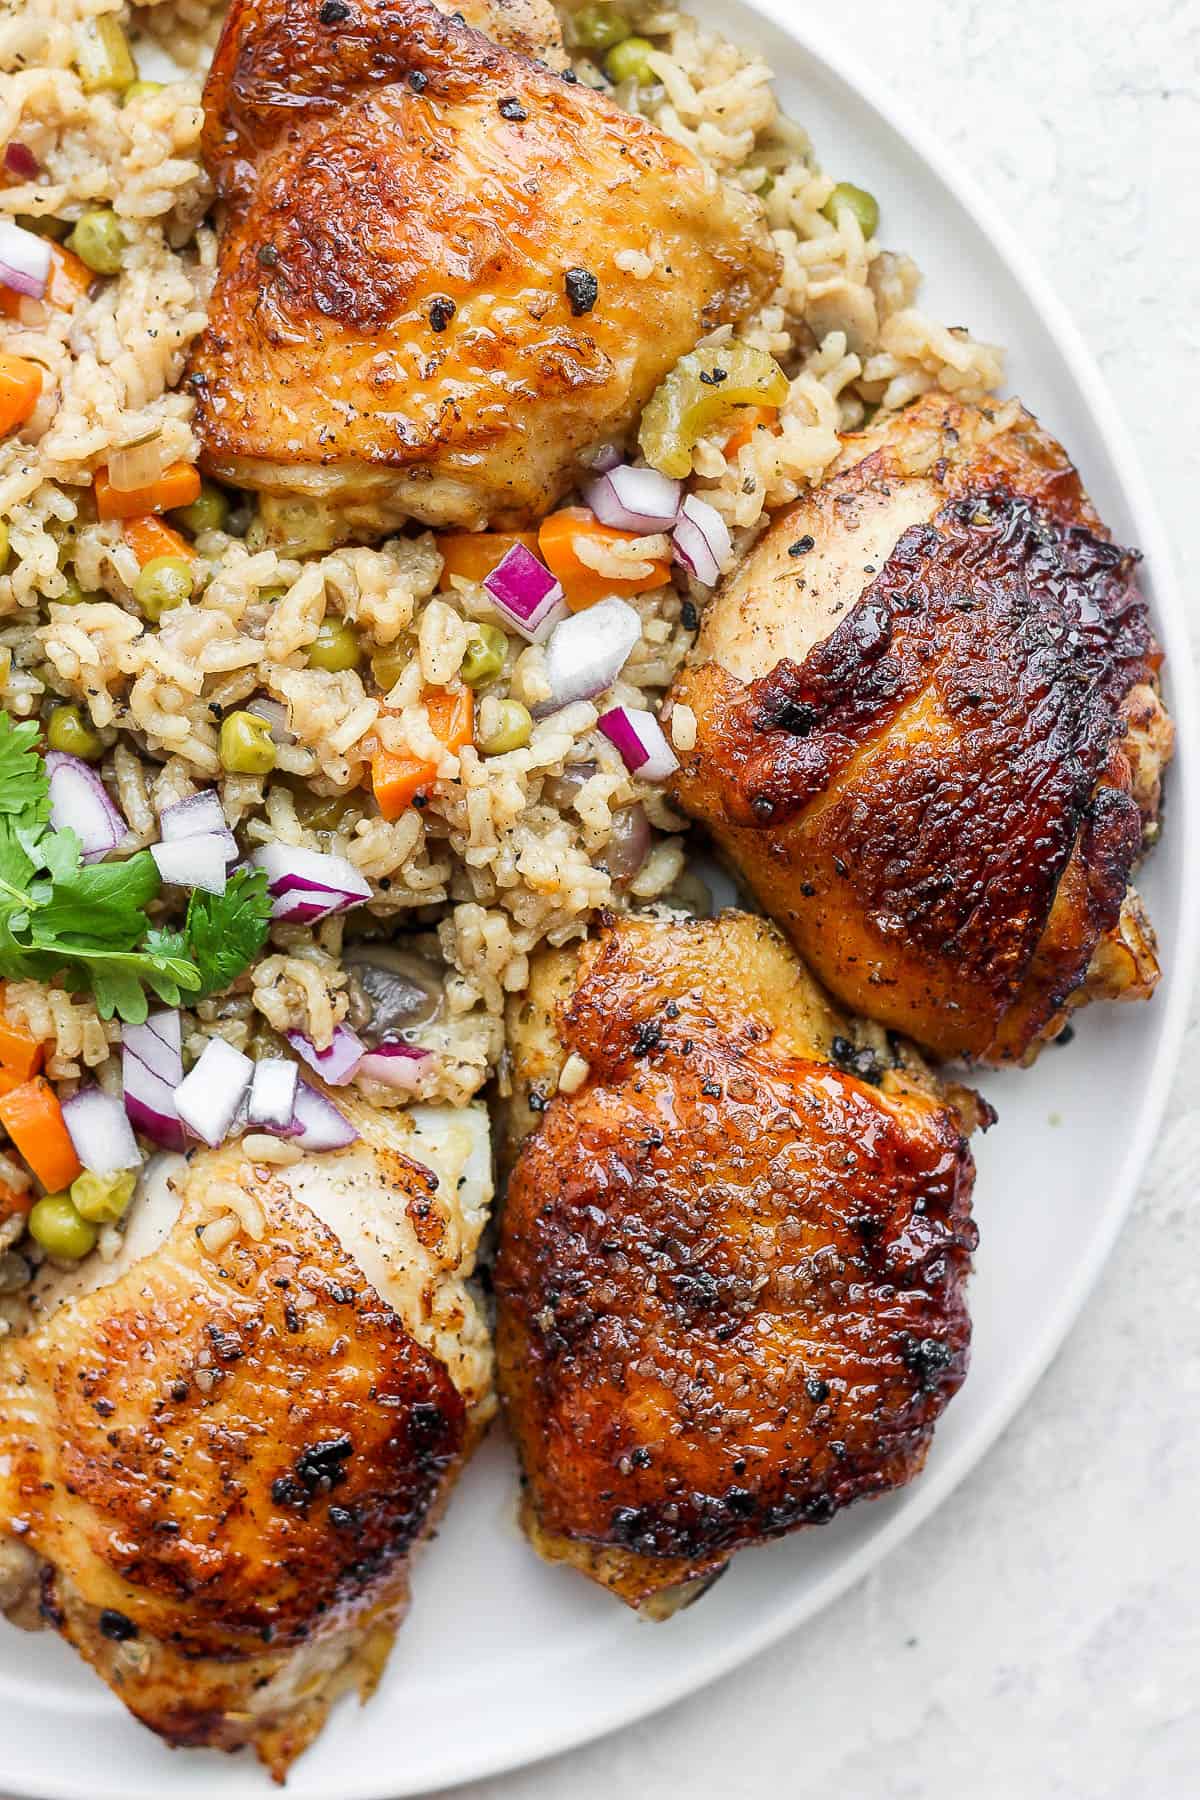 Baked chicken and rice on a plate.